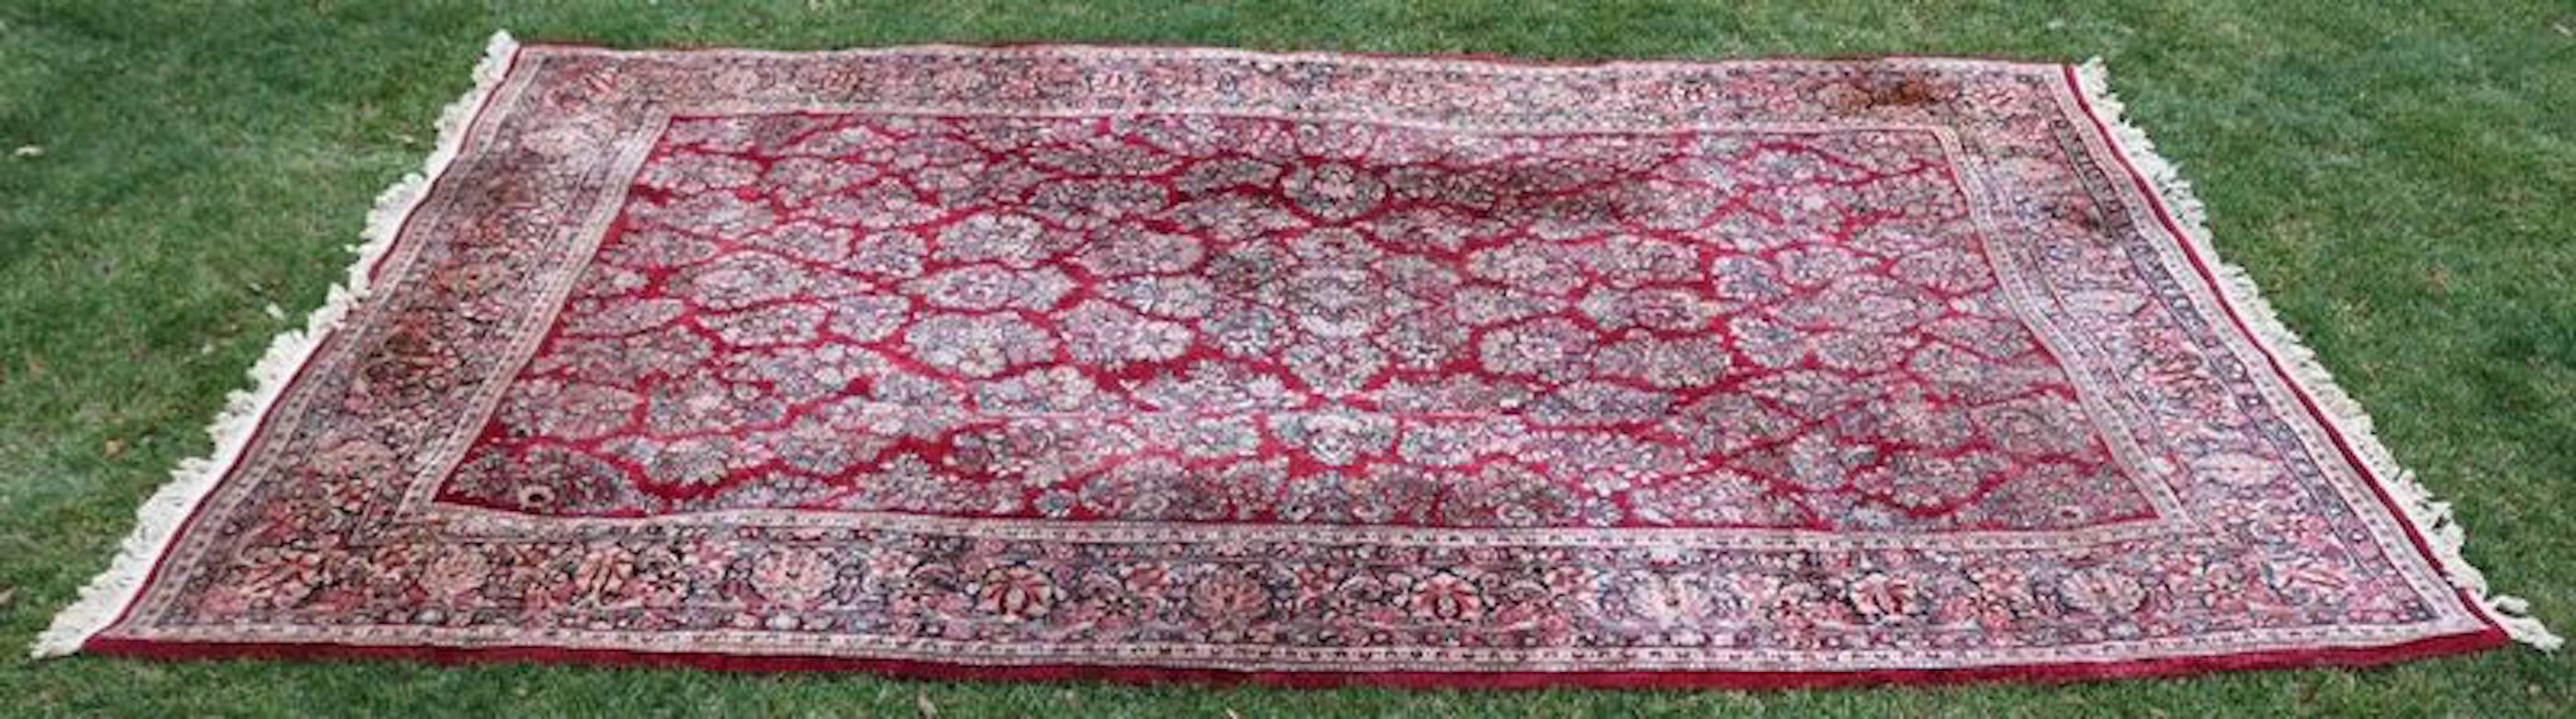 Pre WWII antique palace size Sarouk Persian oriental carpet rug features detached floral spray design, full pile, and fine wool sheen. This is a finely woven, hand knotted carpet, approximately 200-300 kpsi (knots per square inch), circa 1900.